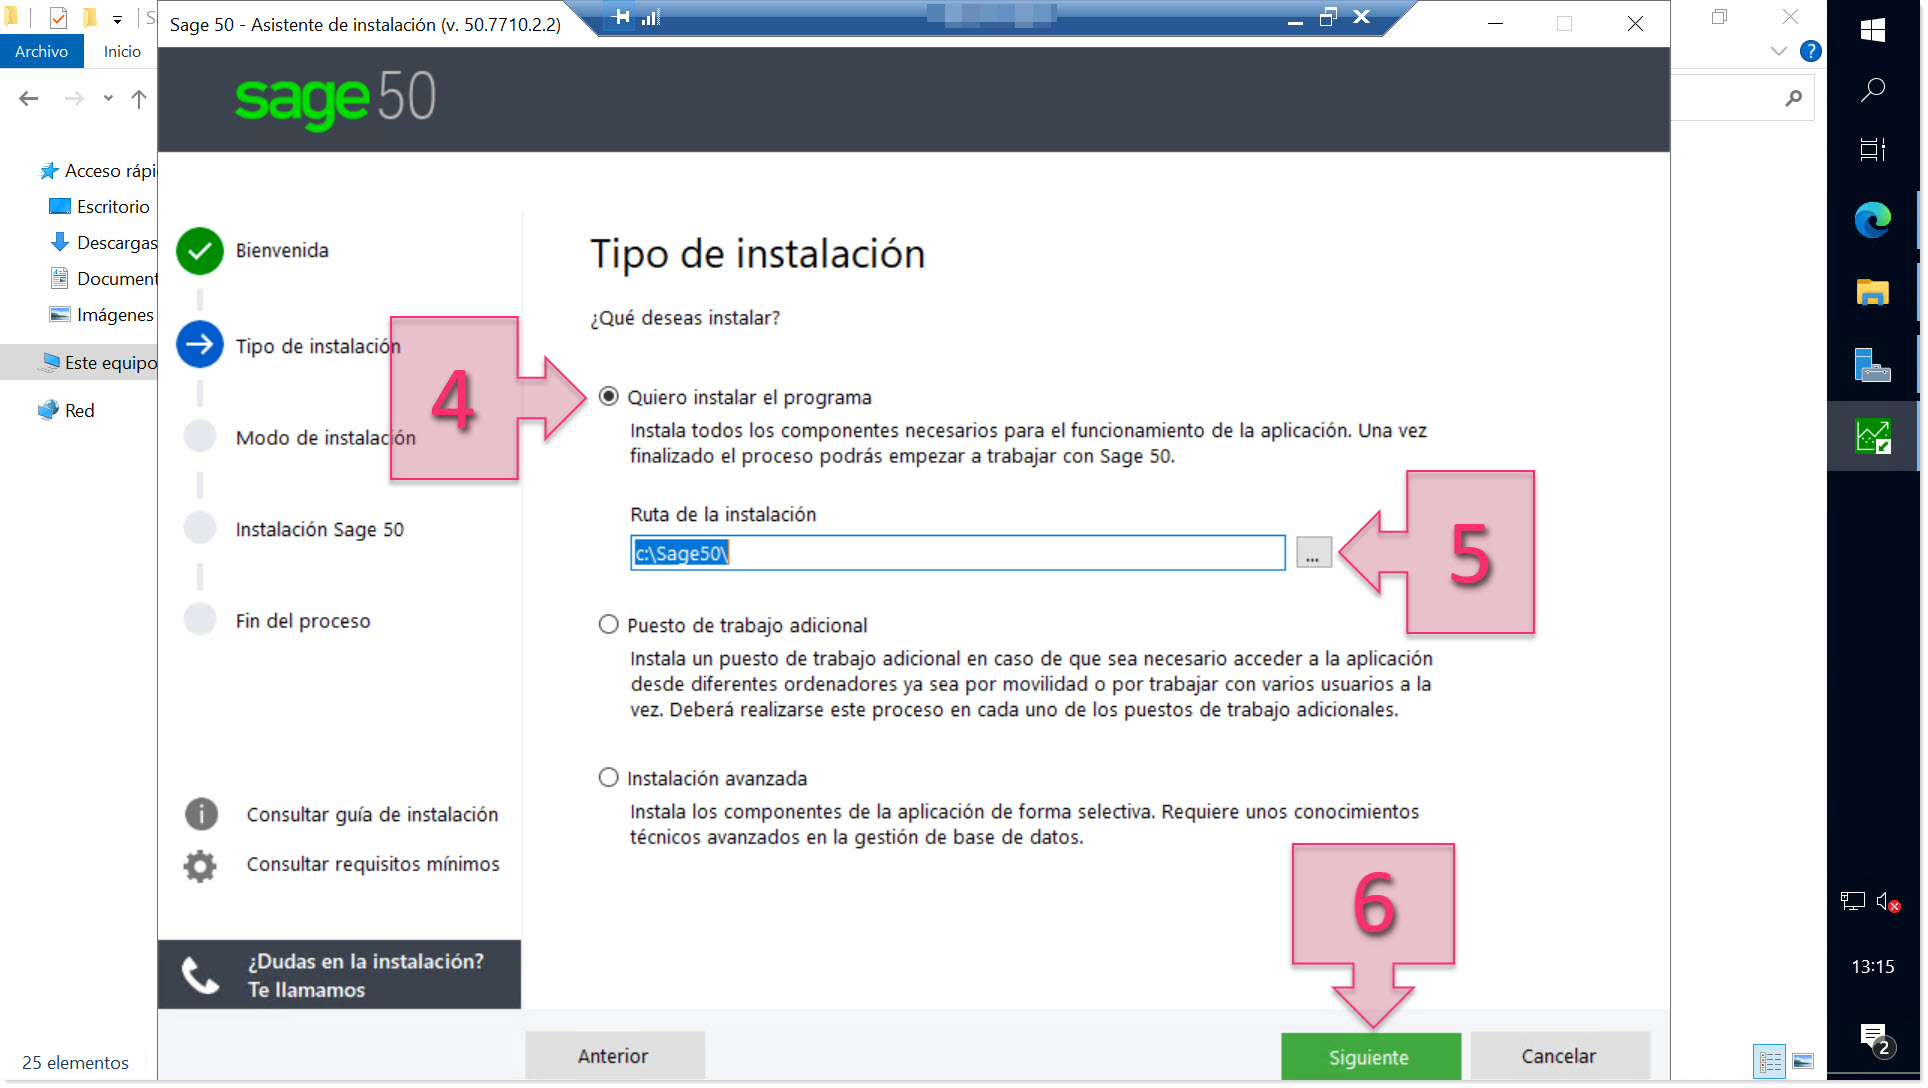 Part 1 - Select the installation type